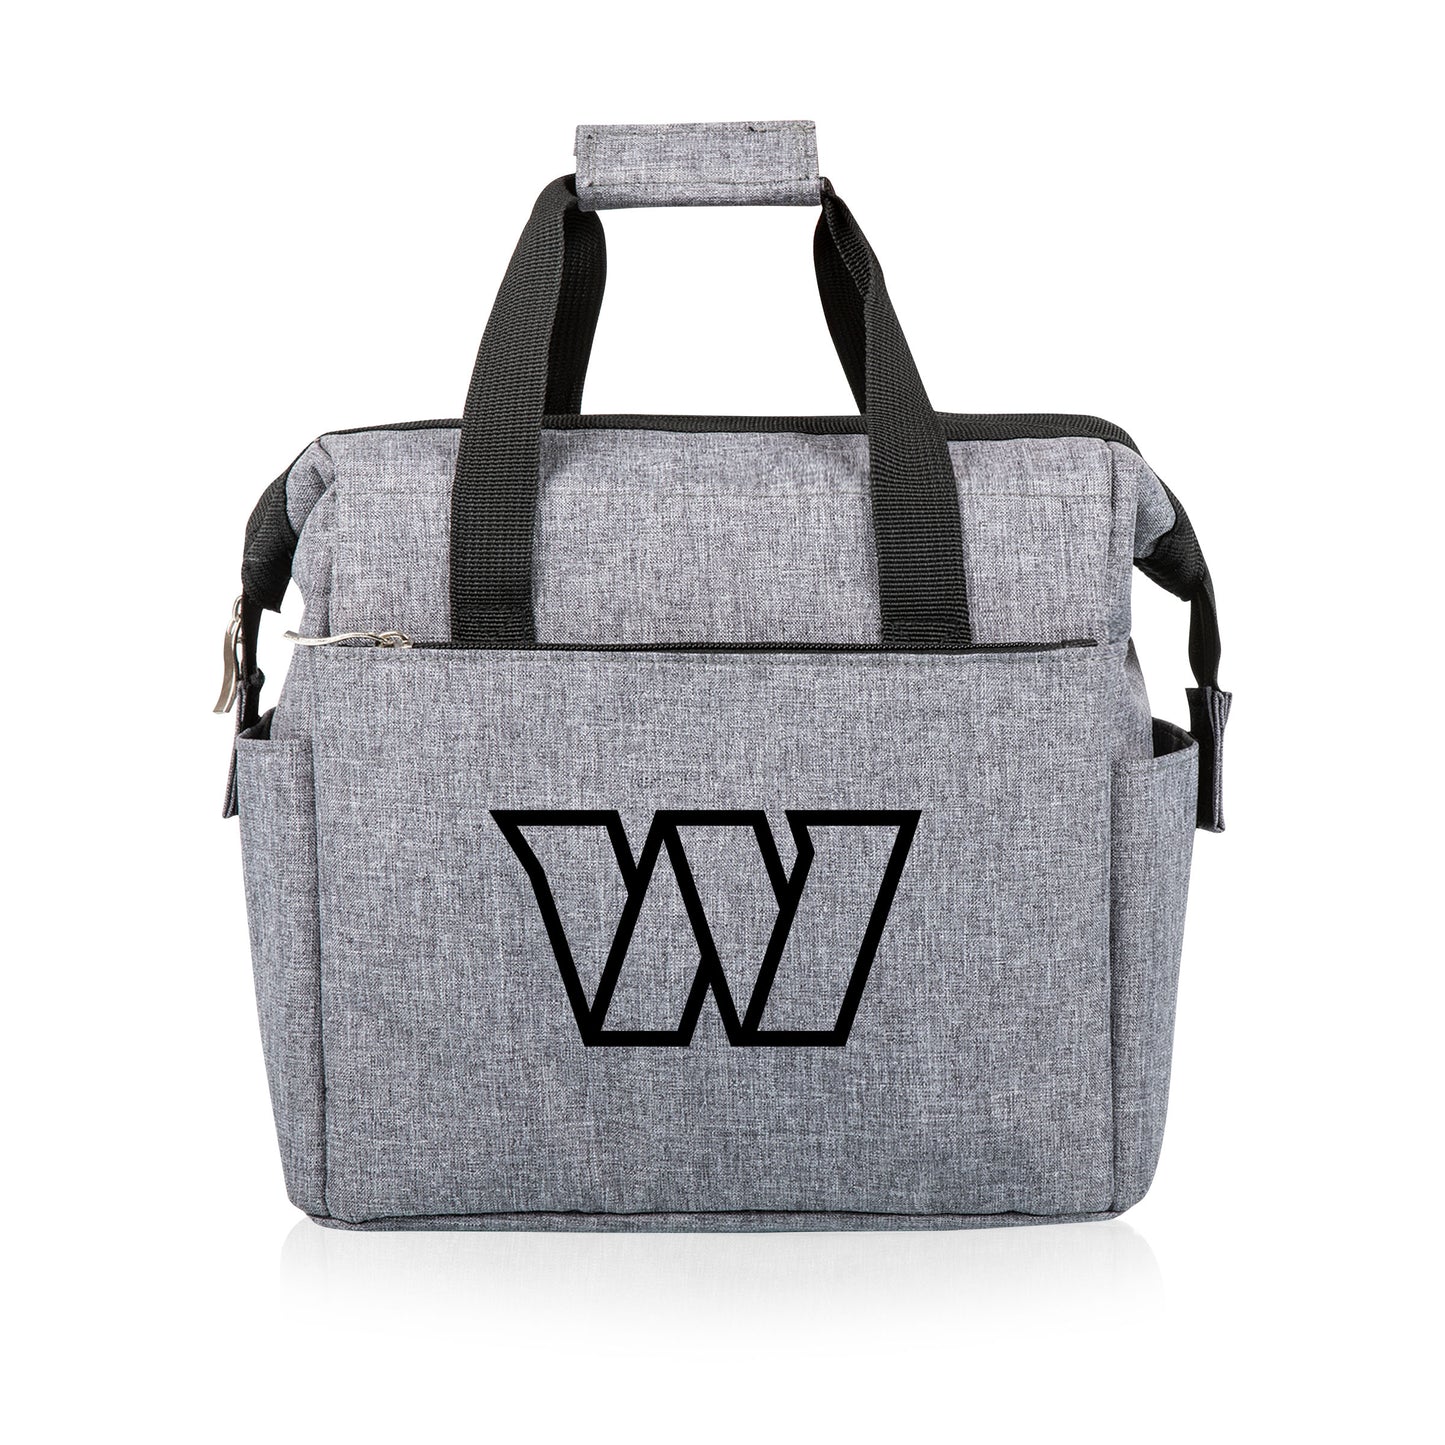 Washington Commanders - On The Go Lunch Cooler